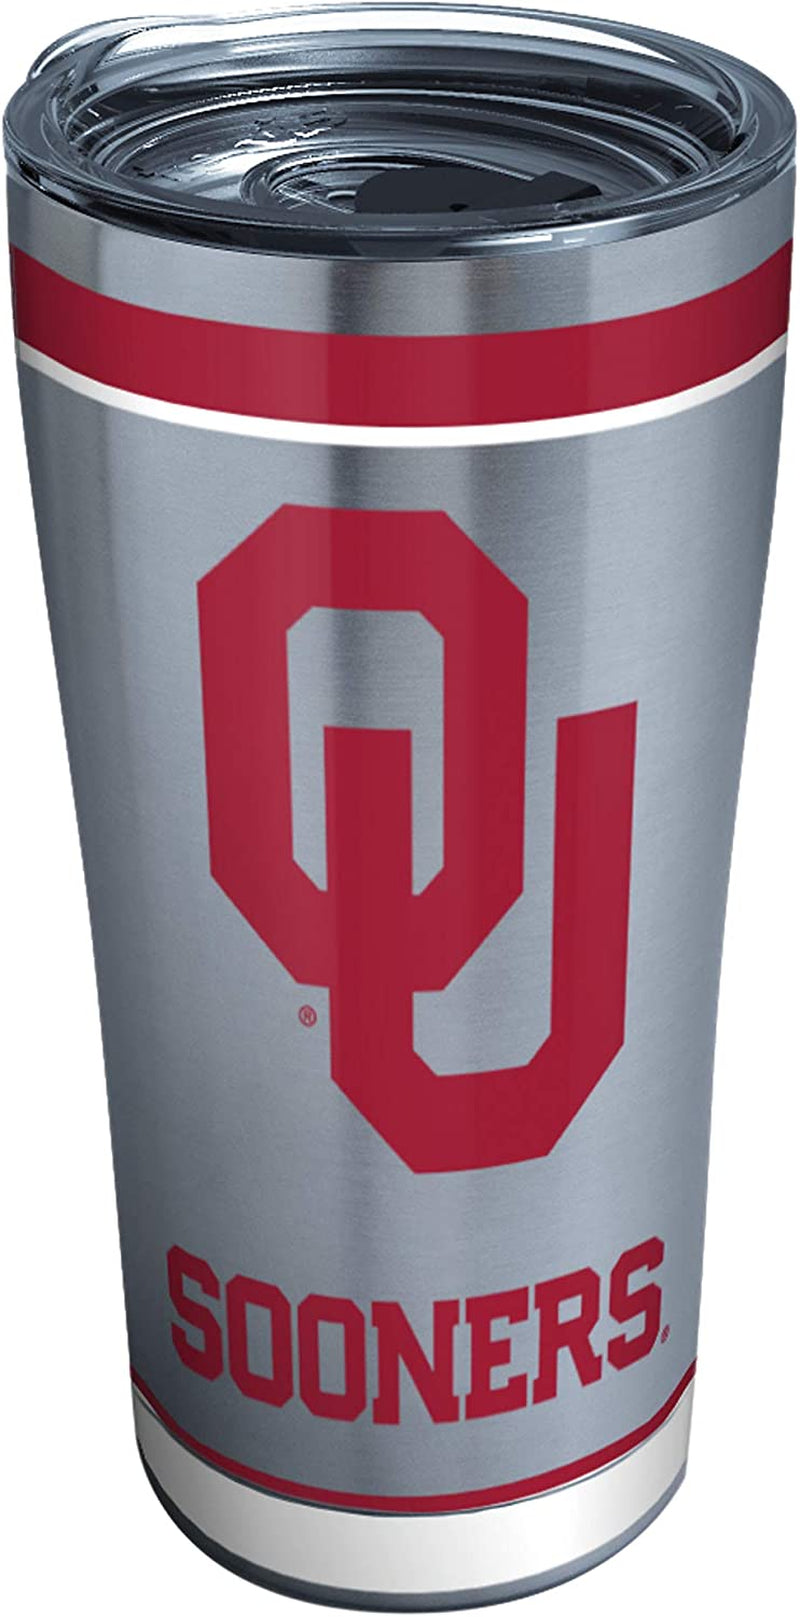 Tervis Triple Walled University of Oklahoma Sooners Insulated Tumbler Cup Keeps Drinks Cold & Hot, 20Oz - Stainless Steel, Tradition Home & Garden > Kitchen & Dining > Tableware > Drinkware Tervis   